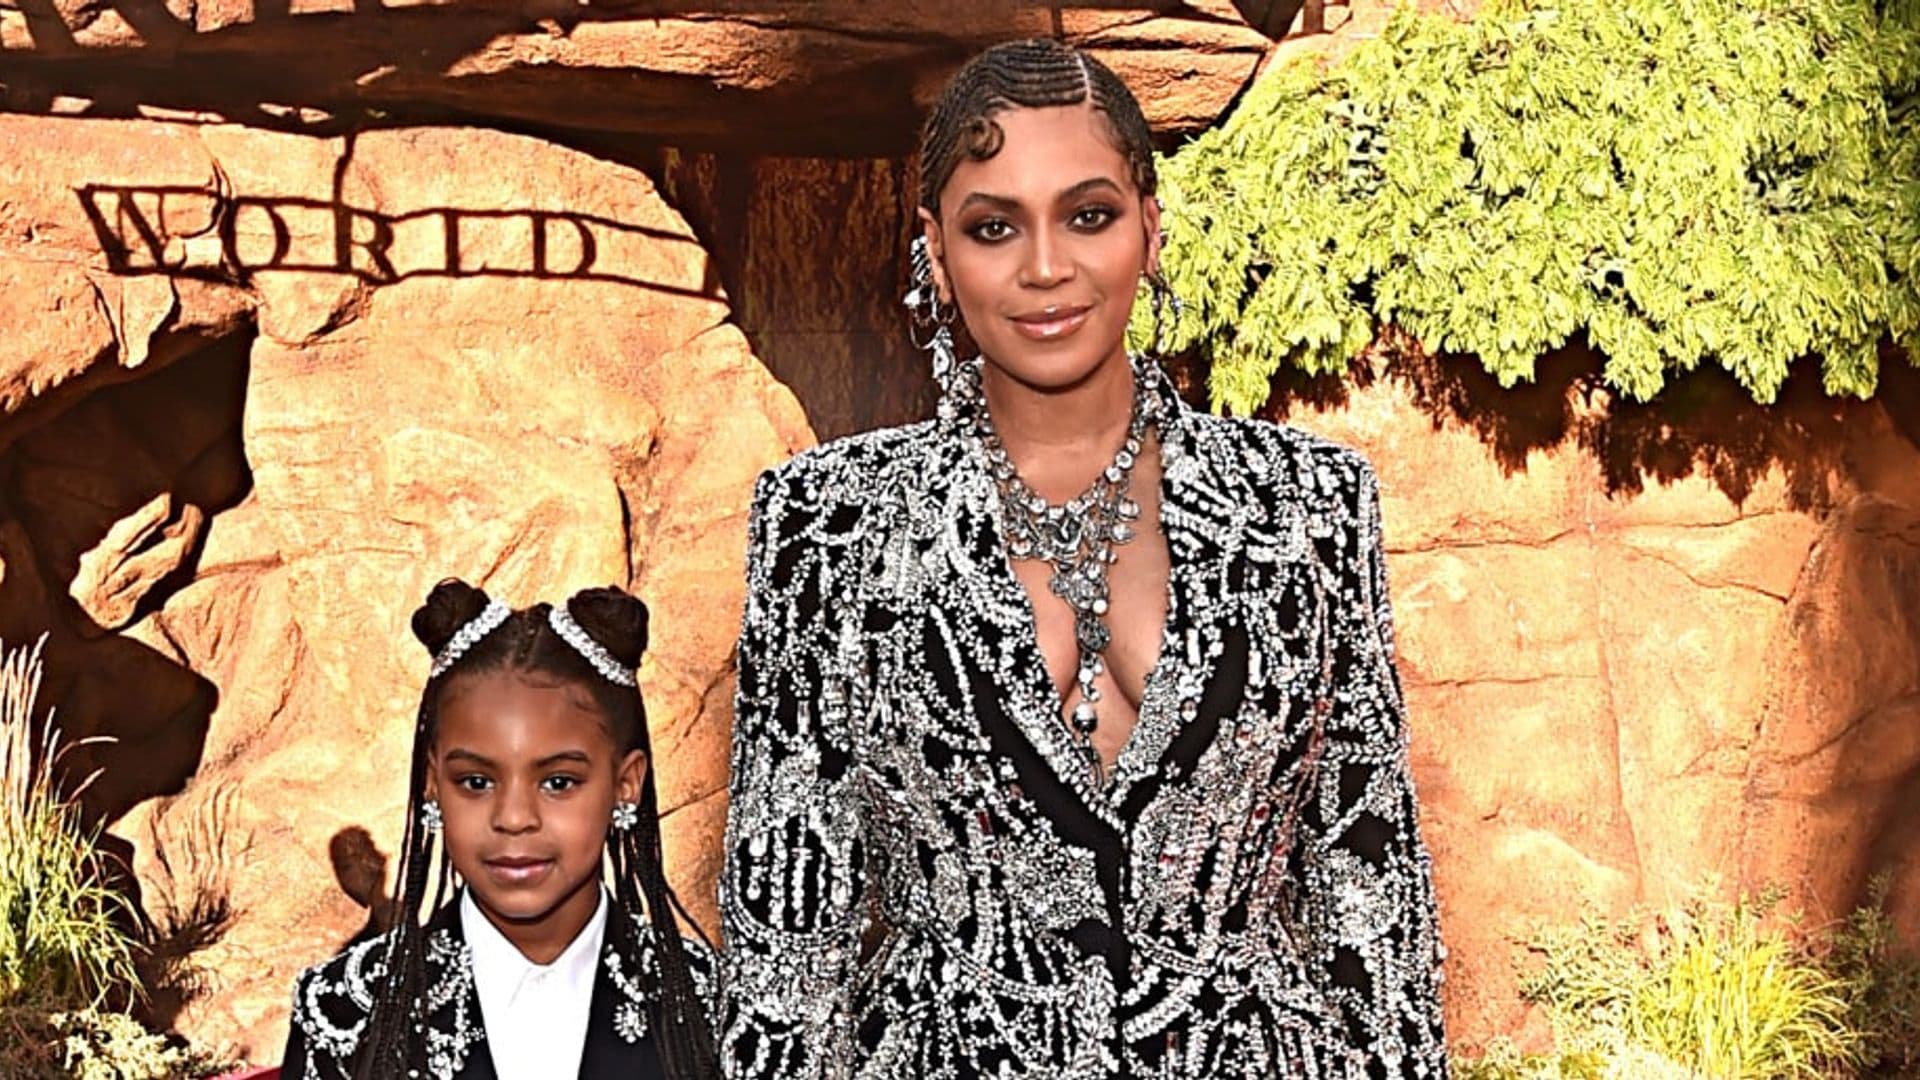 Beyonce's daughter Blue Ivy makes her chart debut